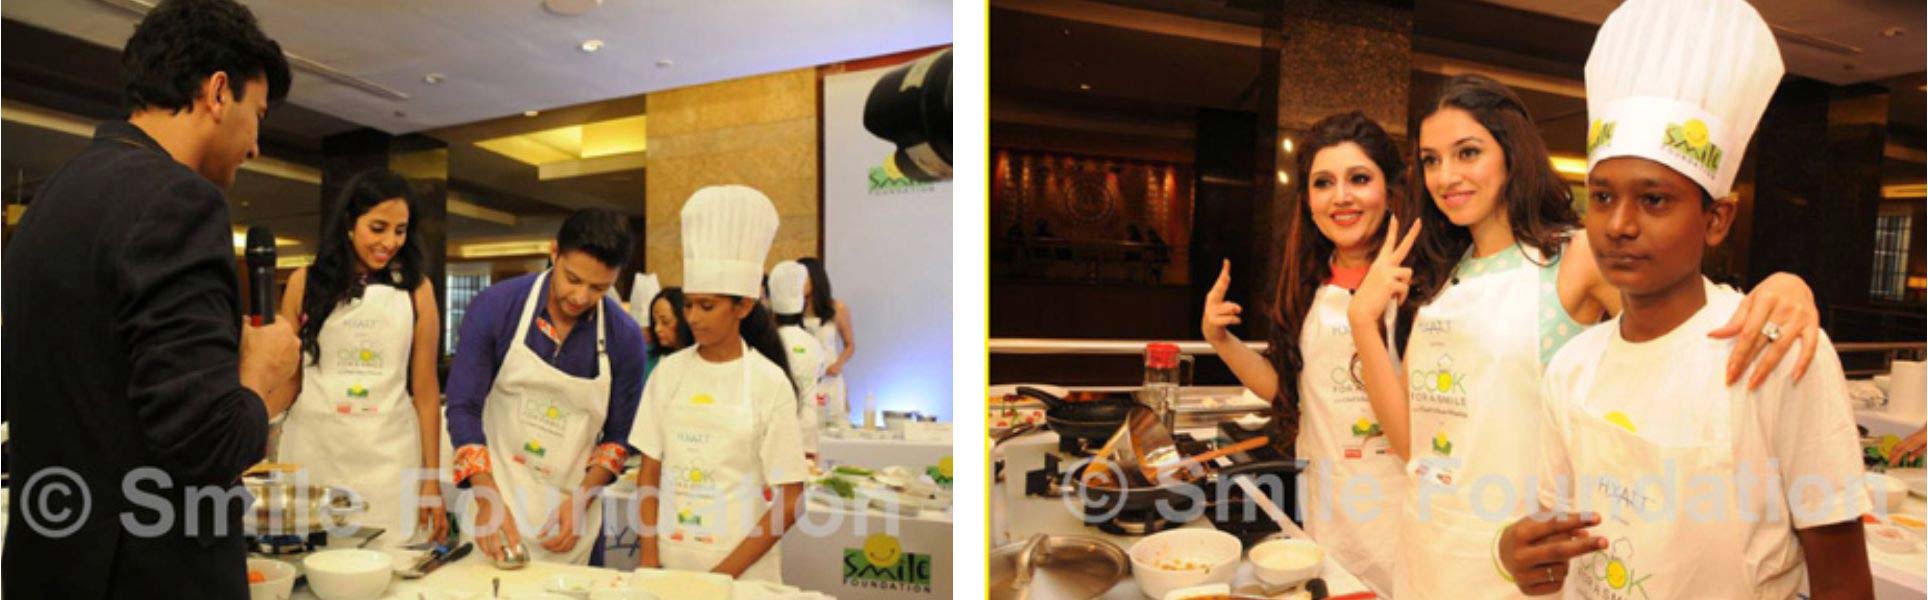 Leaders from different industries “Cook for a Smile” at 4th edition in Mumbai